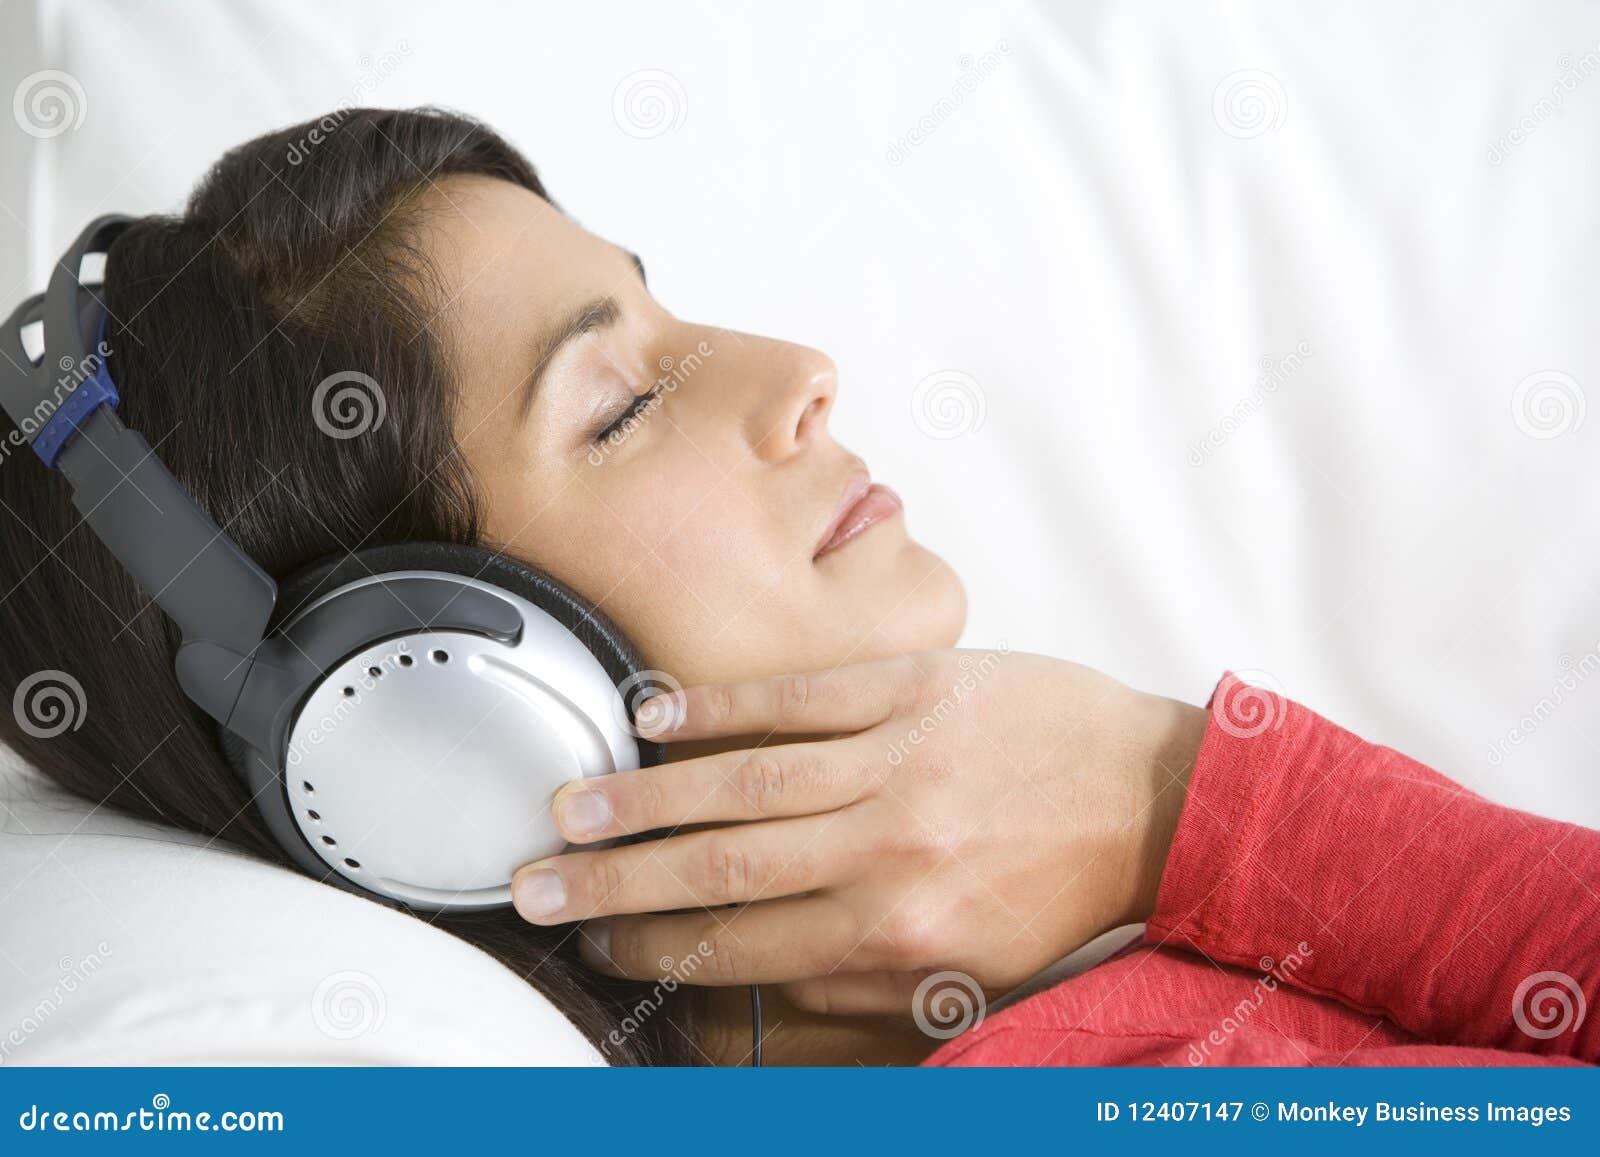 woman relaxing listening to music